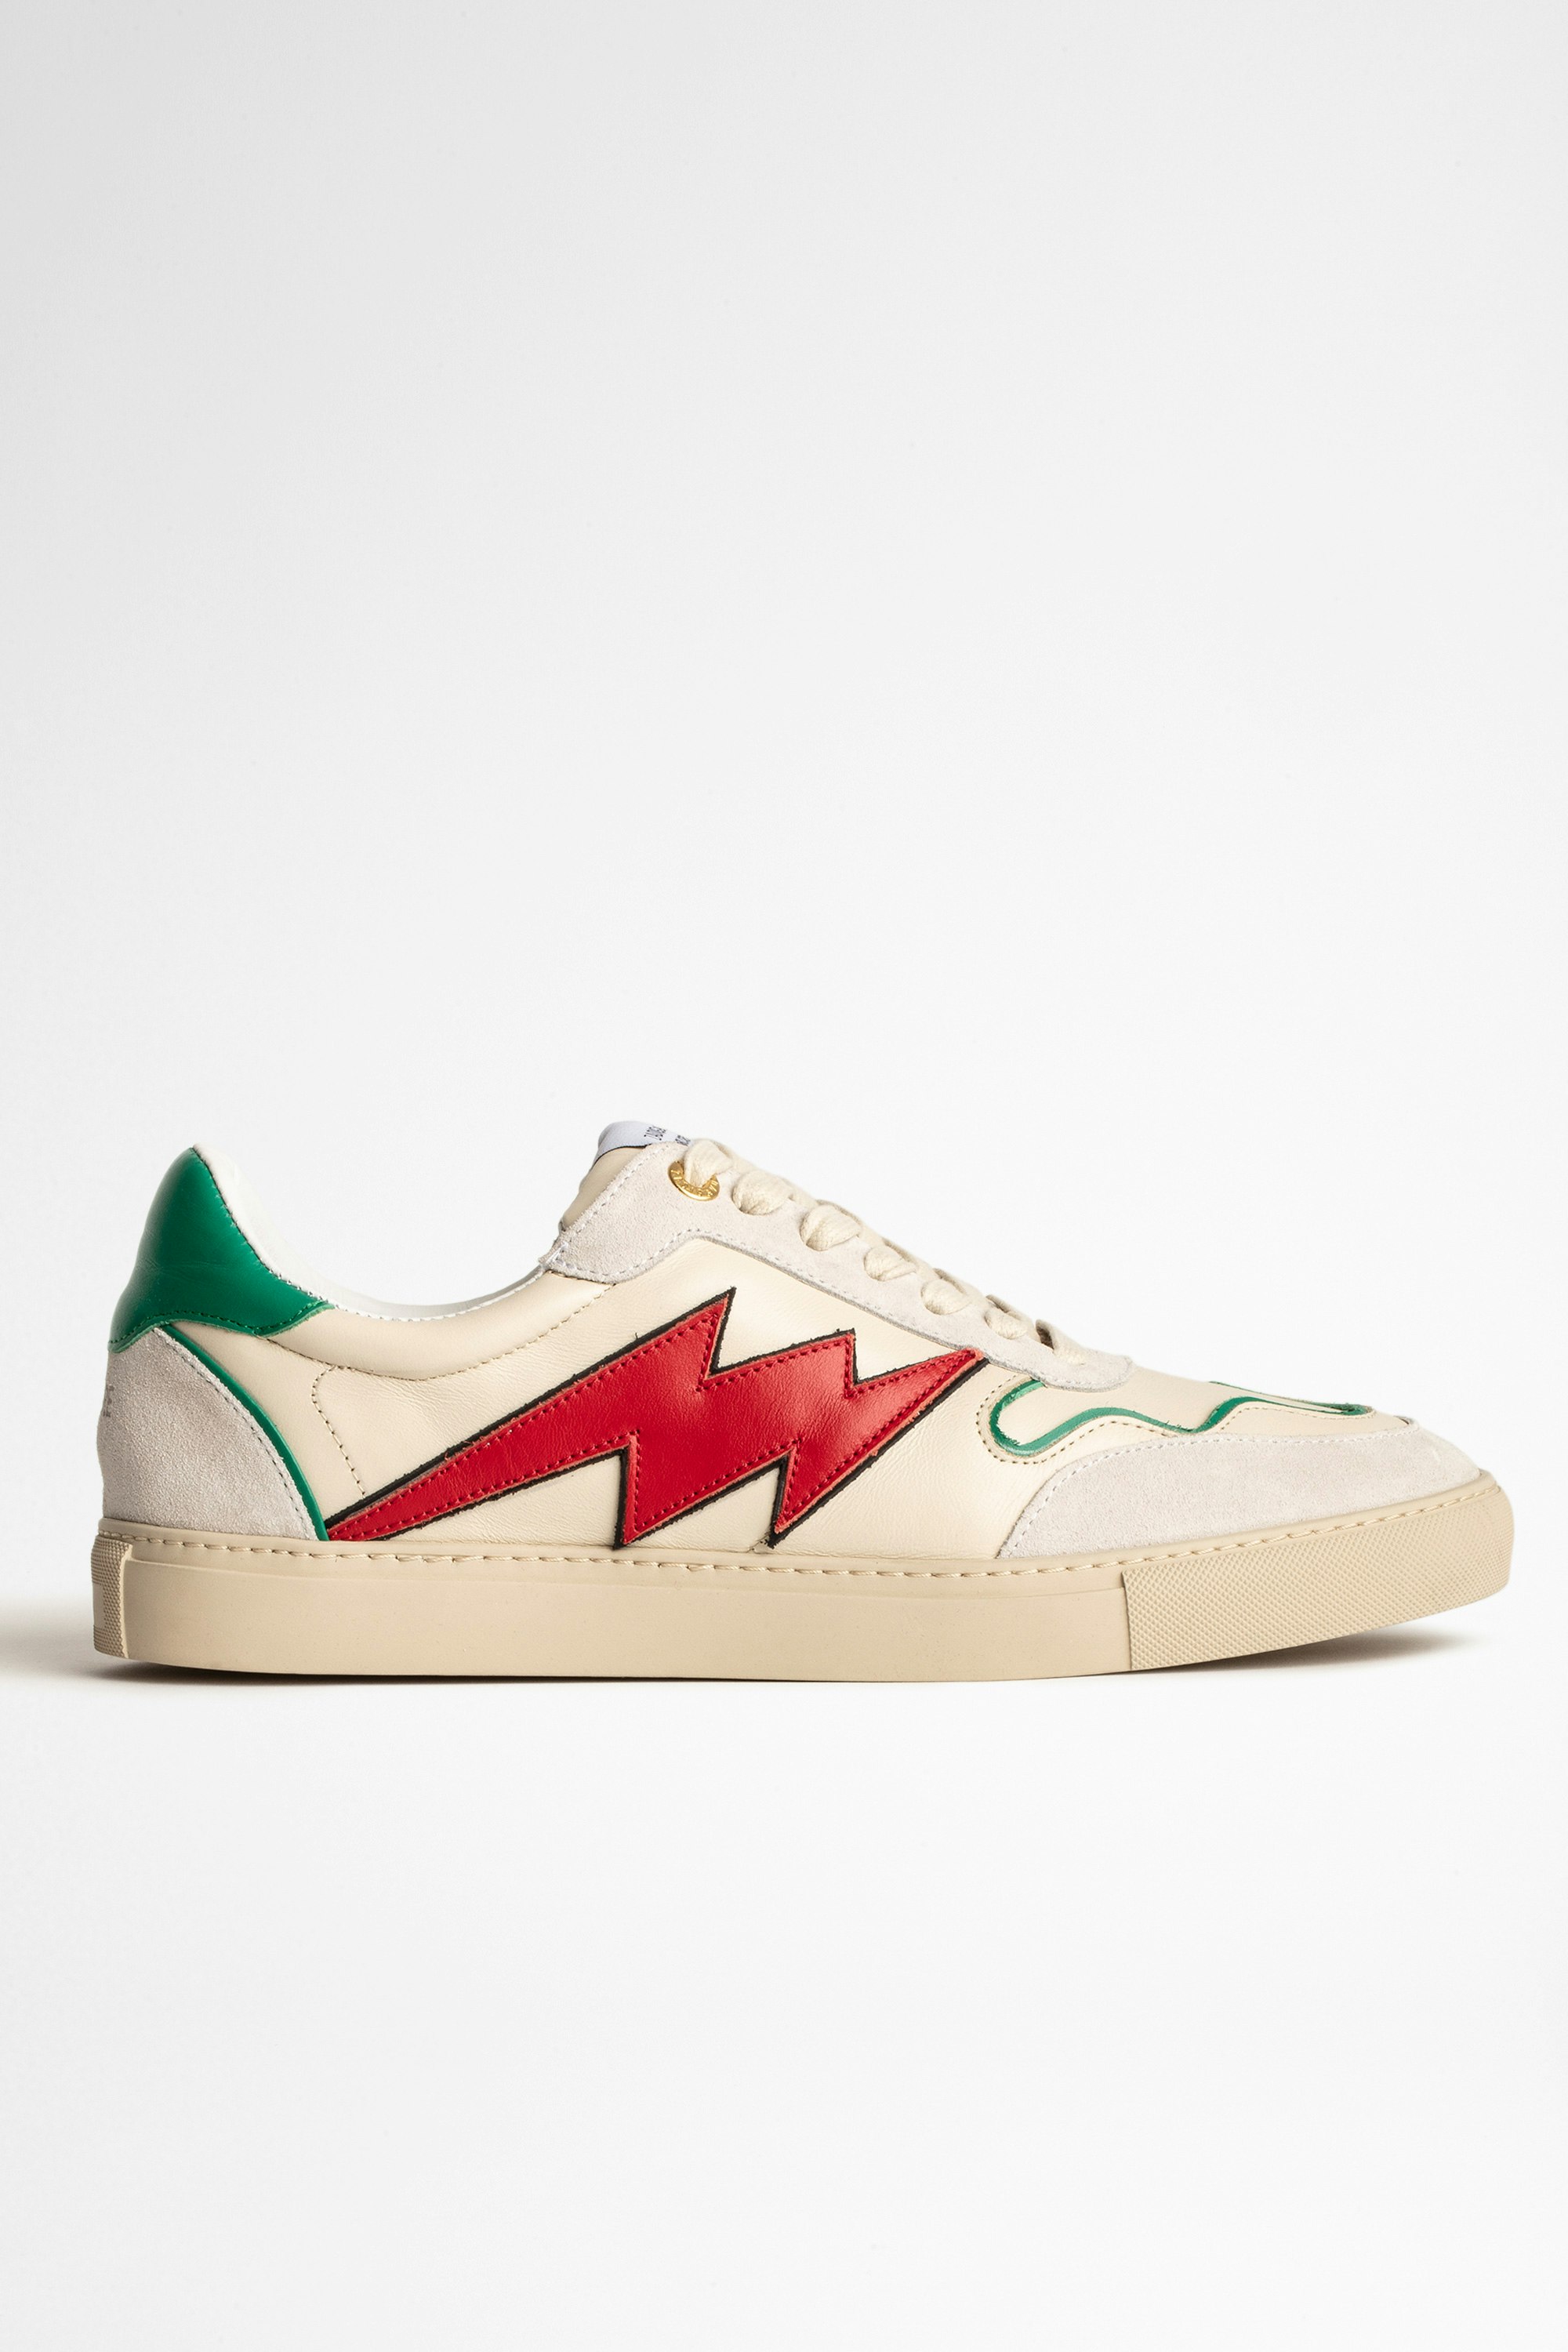 ZV1747 Board Trainers Men’s white leather sneakers with contrasting lightning bolt detail.